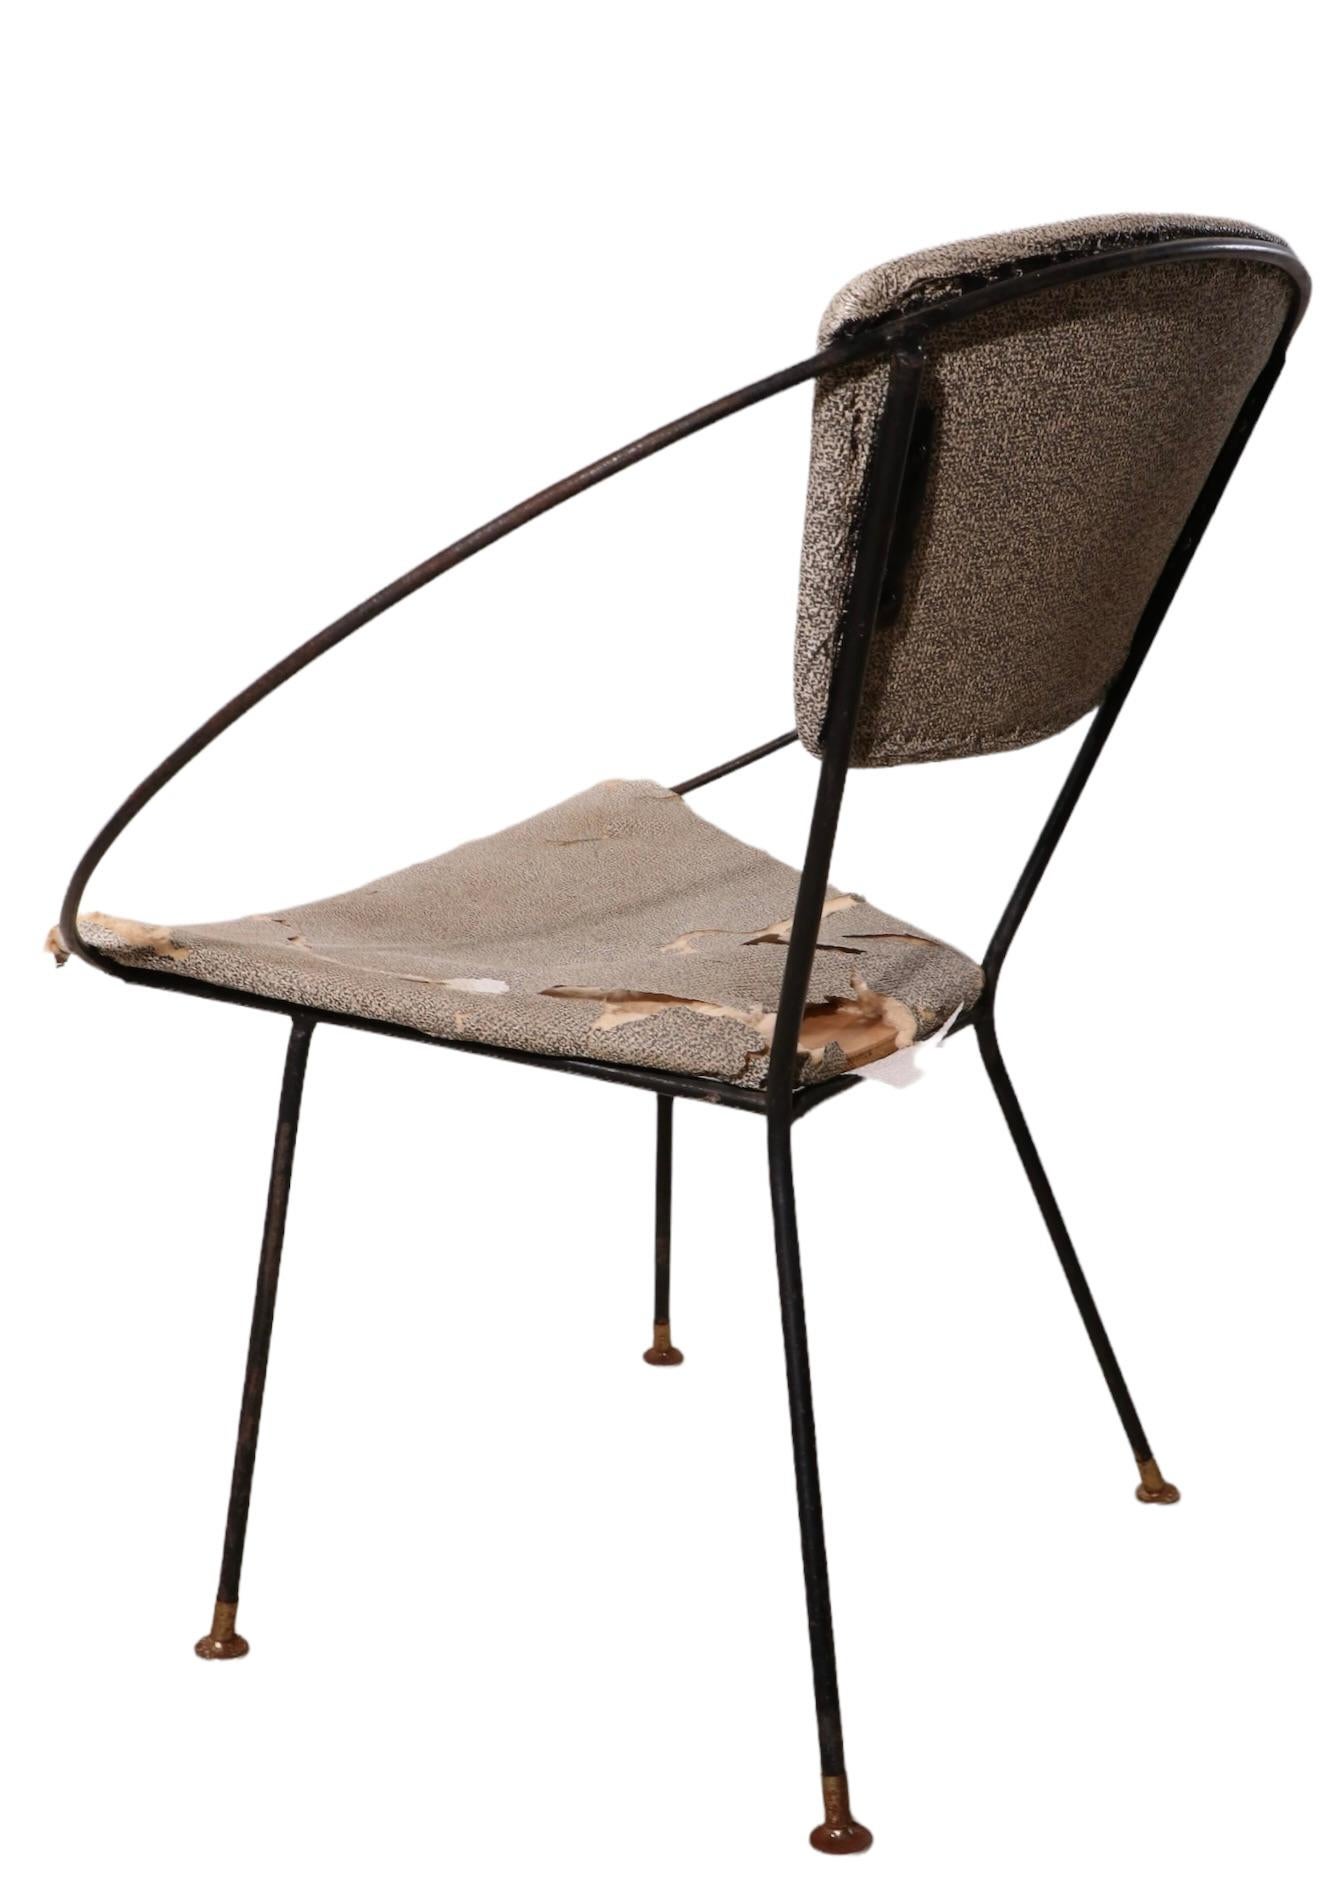 Pr. Wrought Iron Mid Century Hoop Chairs by John Cicchelli for Riley Wolff 1950s For Sale 5